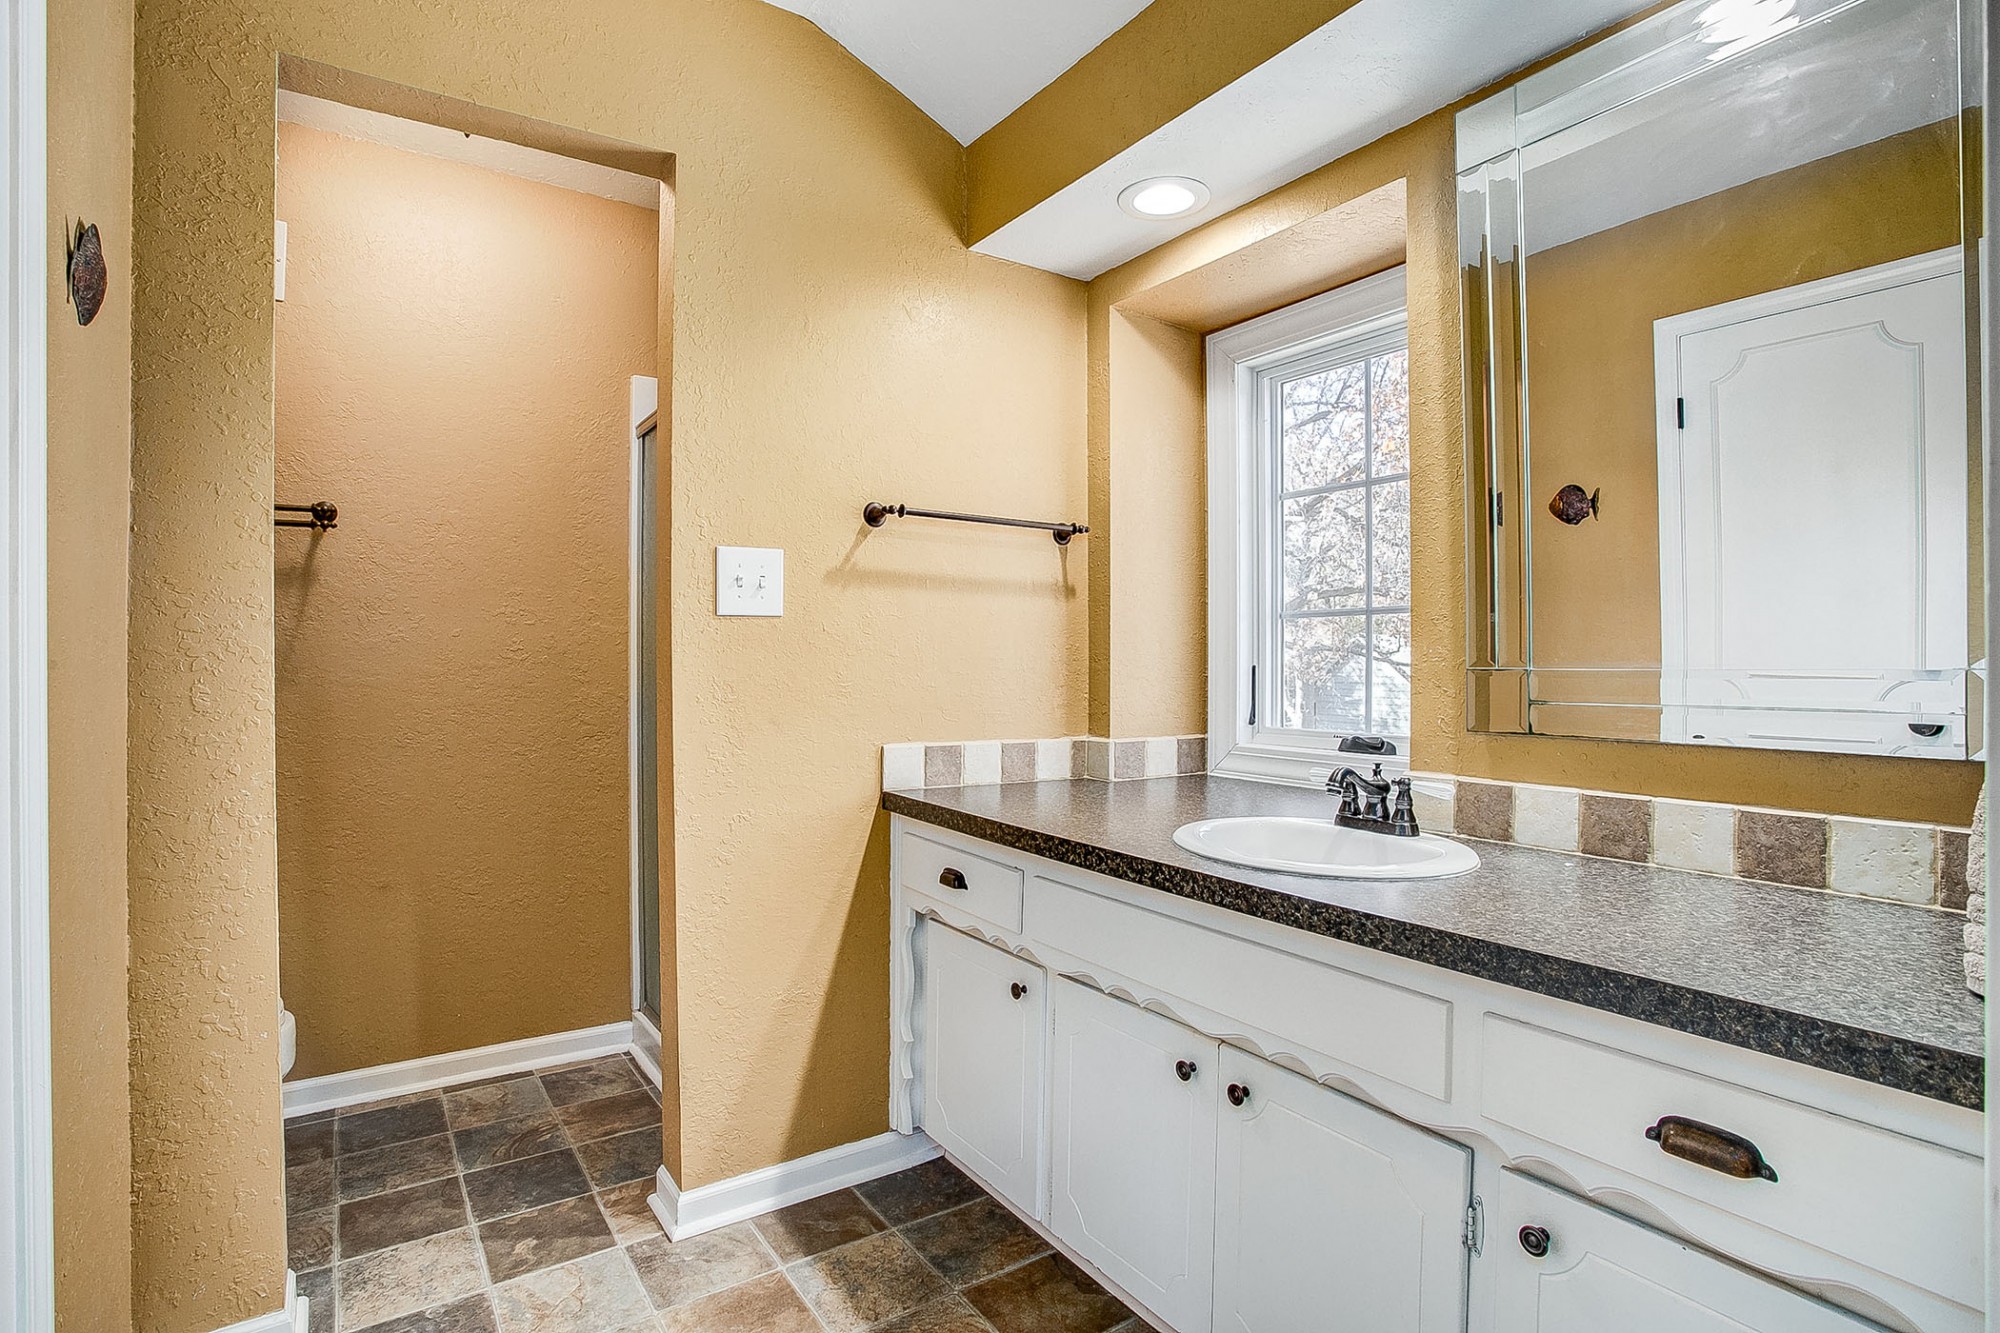 Master bath with vaulted ceiling, expansive vanity and walk-in shower.